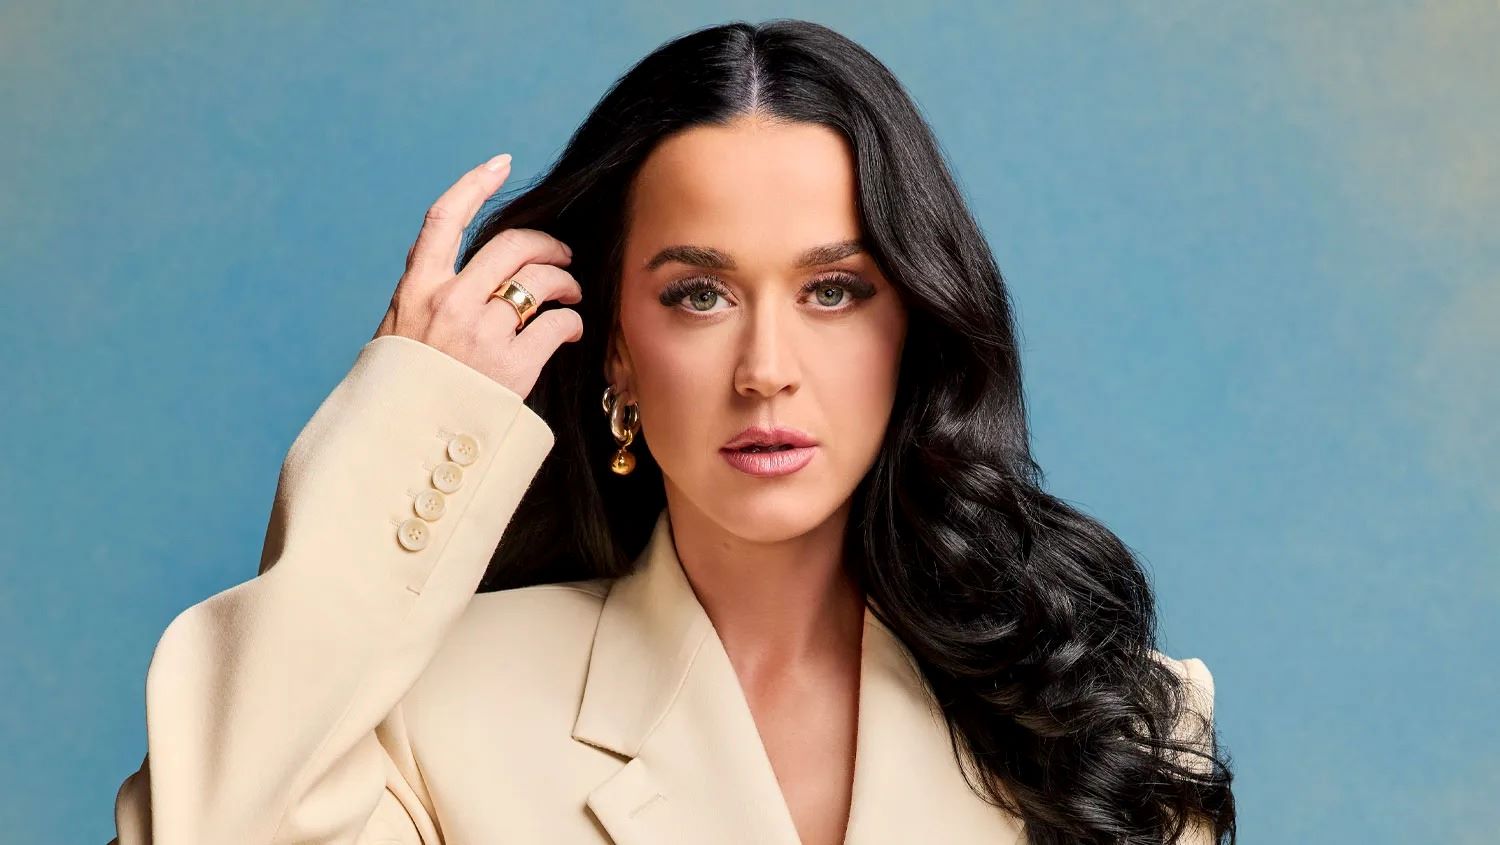 Katy Perry Bids Farewell To ‘American Idol’ After 7 Years